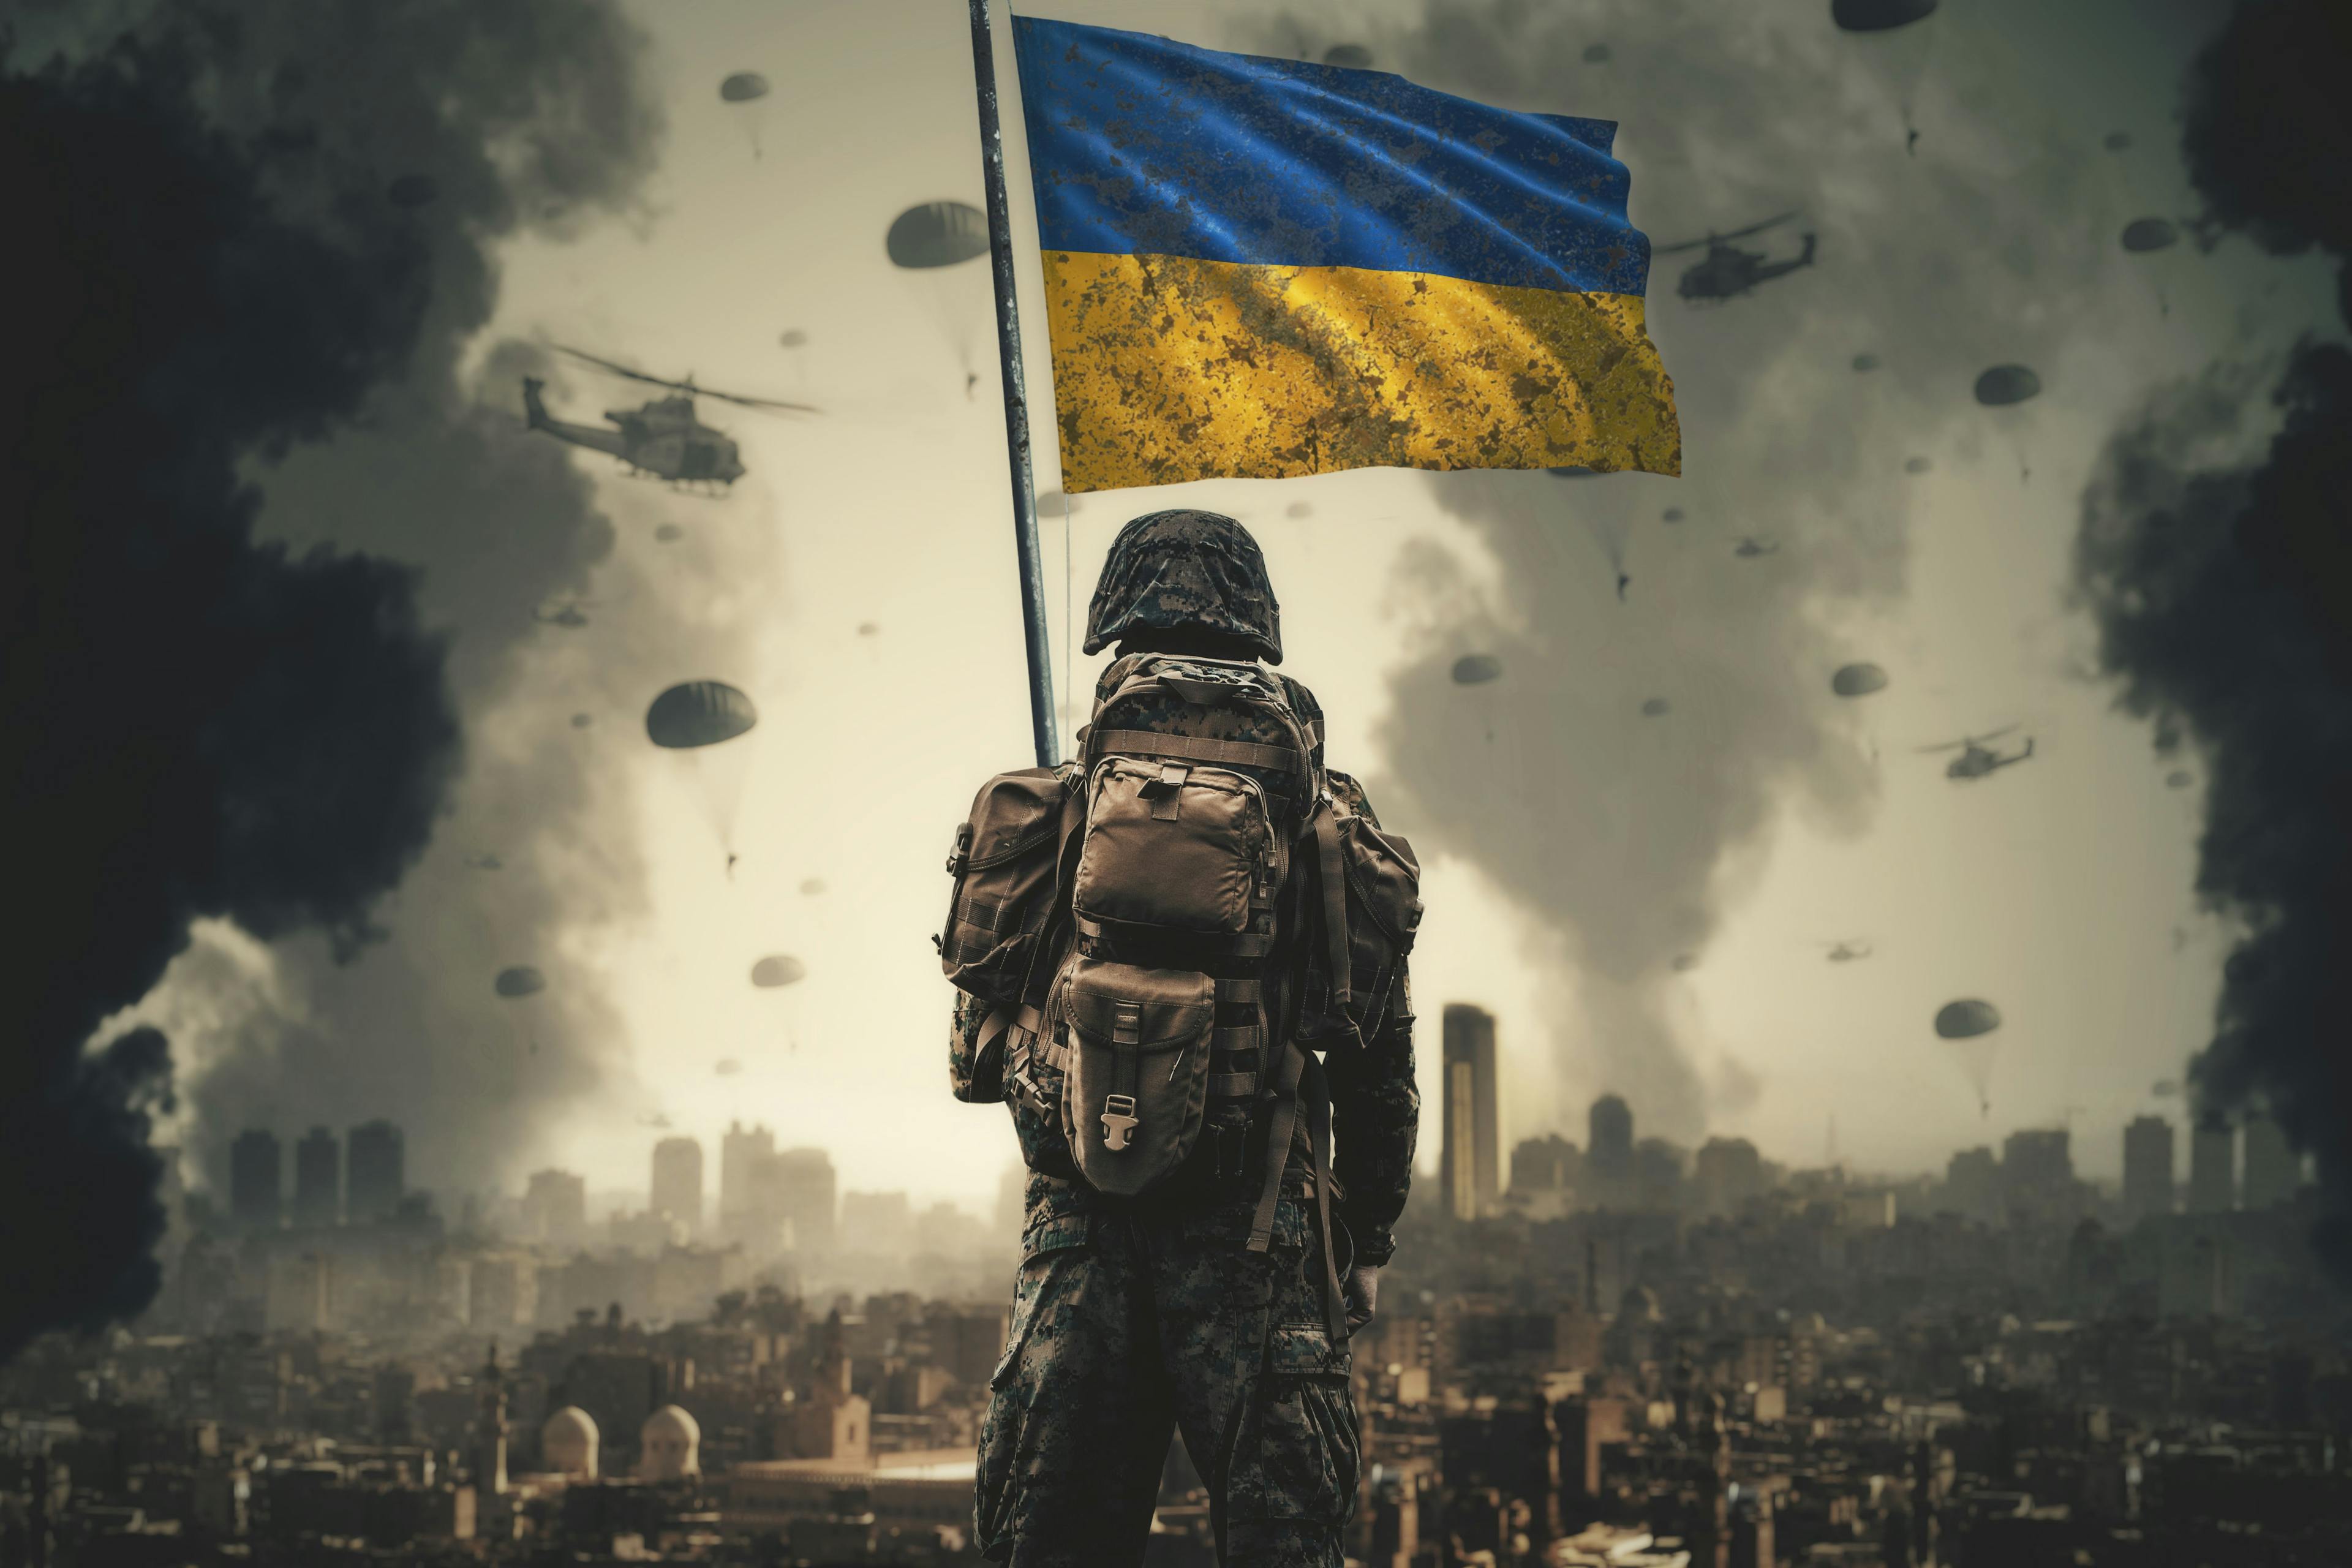 Humiliation and Dignity in Ukraine and Life